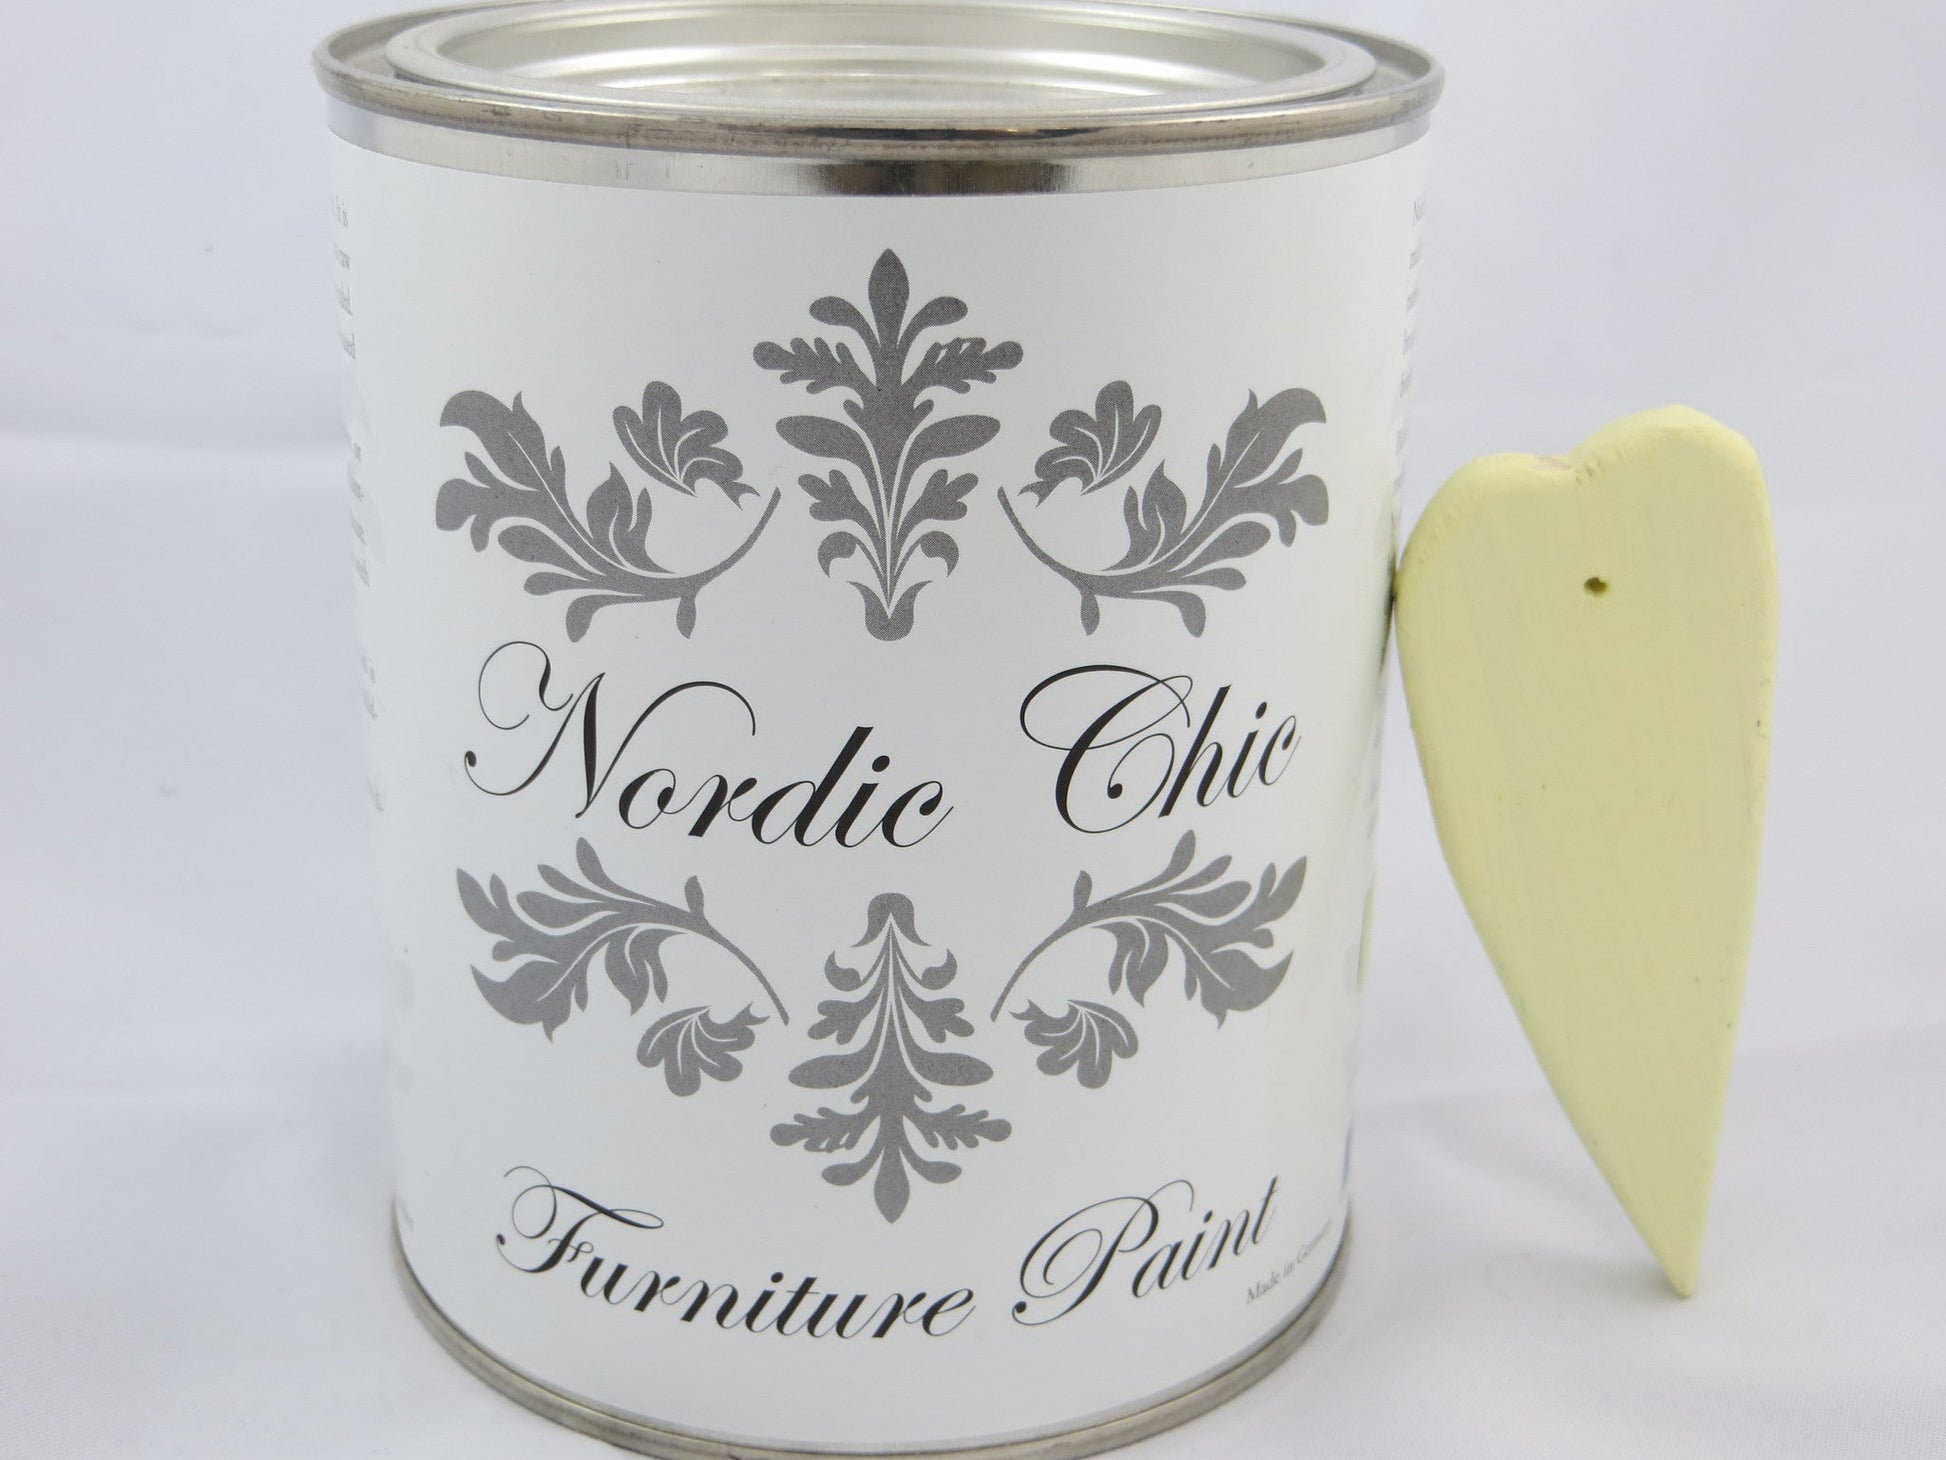 Nordic Chic Furniture Paint - Silky Yellow - Nordic Chic®